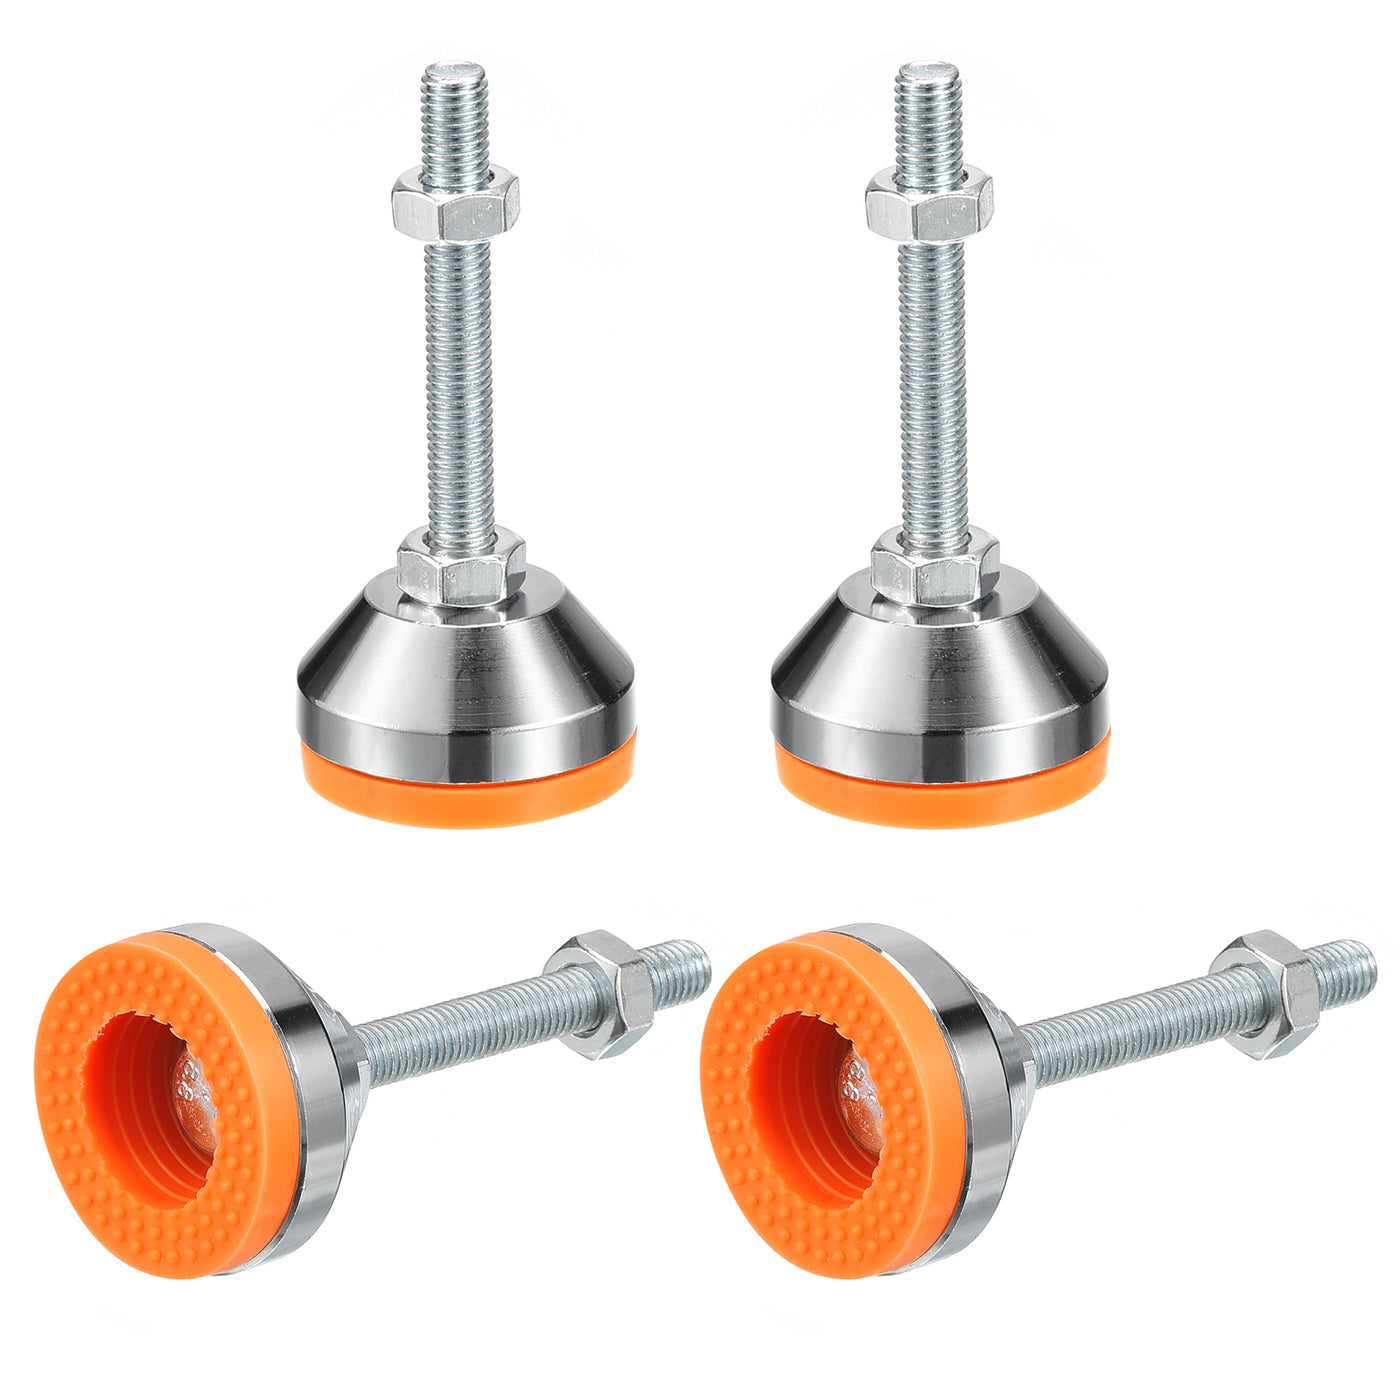 uxcell Uxcell Leveling Feet, 4Pcs M10x70x50mm - Carbon Steel Non-Skid Anti-shock Adjustable Table Feet, Leveling Screw Leg for Furniture Workshops Equipment